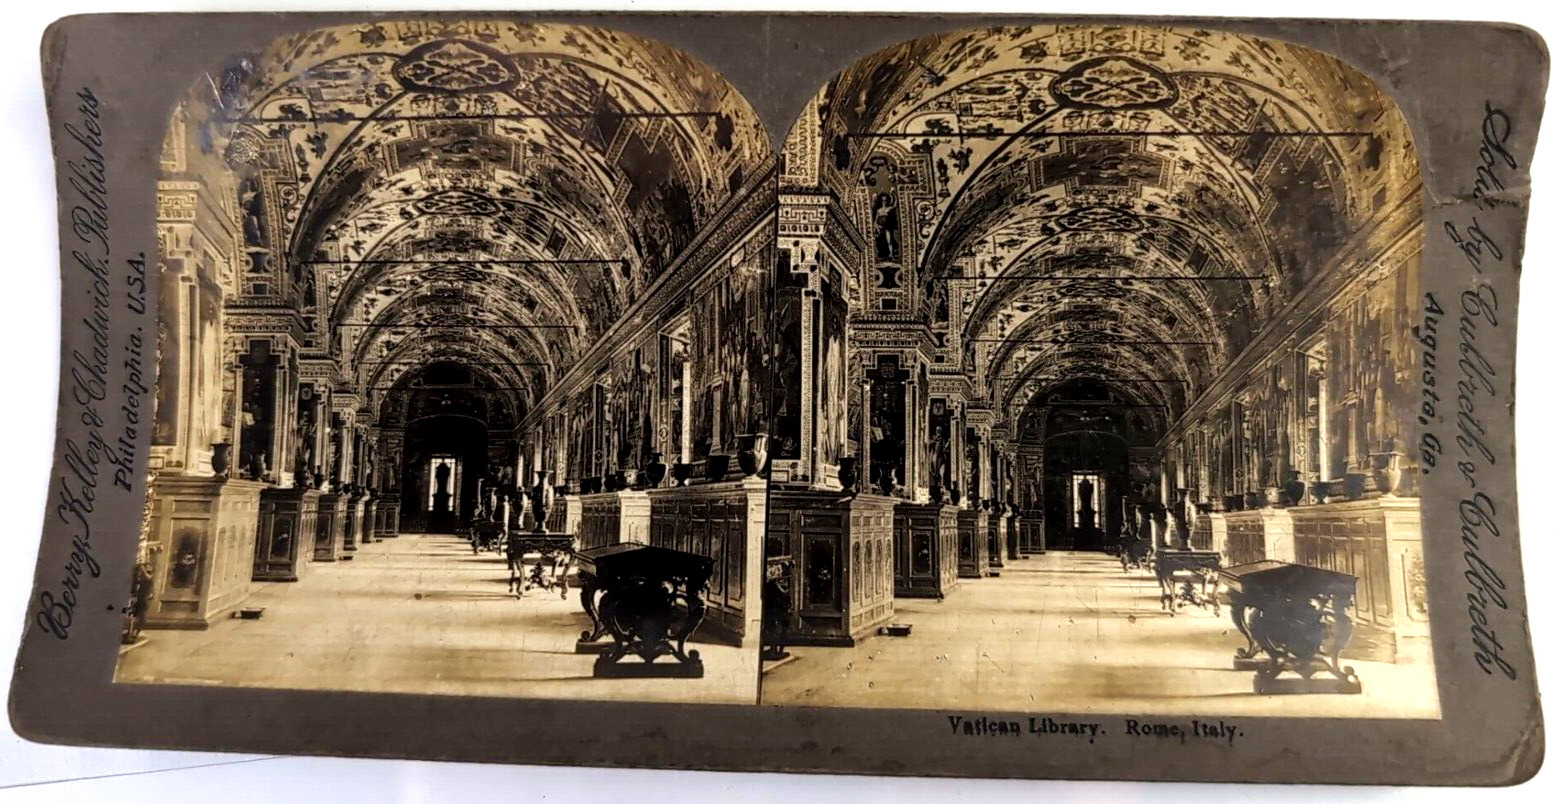 Vintage Stereograph Stereo View Stereoscope Card 1904 Vatican Library Rome Italy